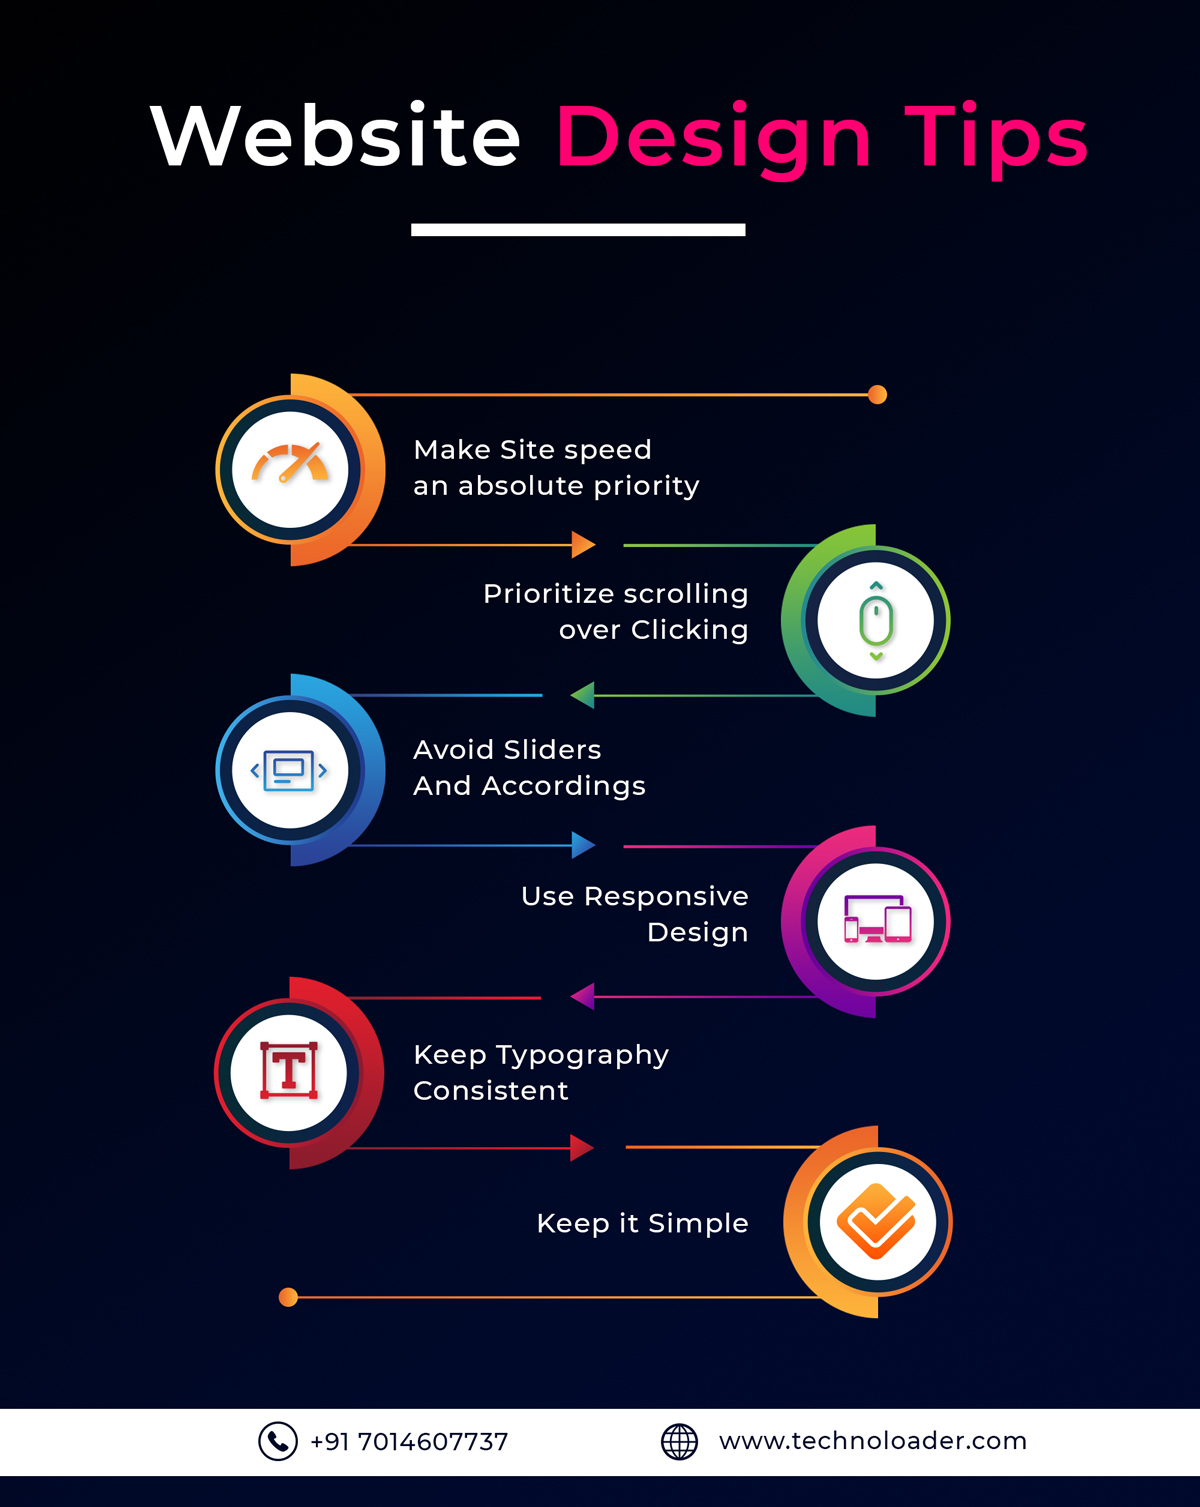 Website

 

 
     
 

Make Site speed
an absolute priority

Prioritize scrolling
over Clicking

~ URE
Avoid Sliders

And Accordings

¥

Use Responsive
Design

Keep Typography
Consistent

 

Keep it Simple

OS) +91 7014607737 &) www.technoloader.com